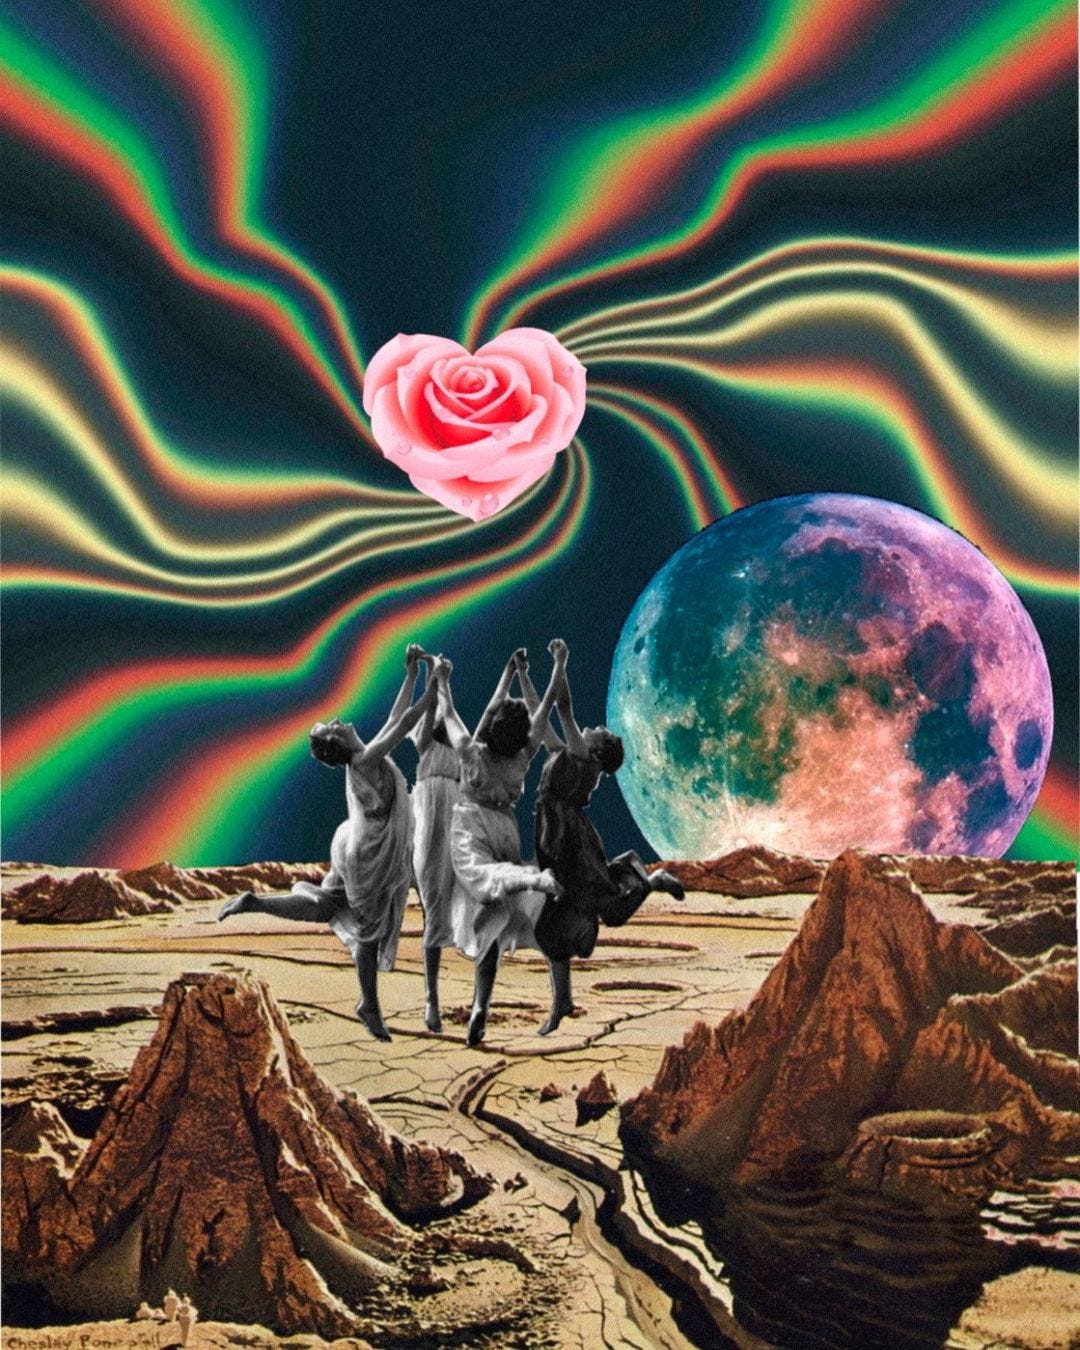 The Society of Fatigue”: The Spiritual & Psychedelic Collages by Anarkoiris  » Design You Trust — Design Daily Since 2007